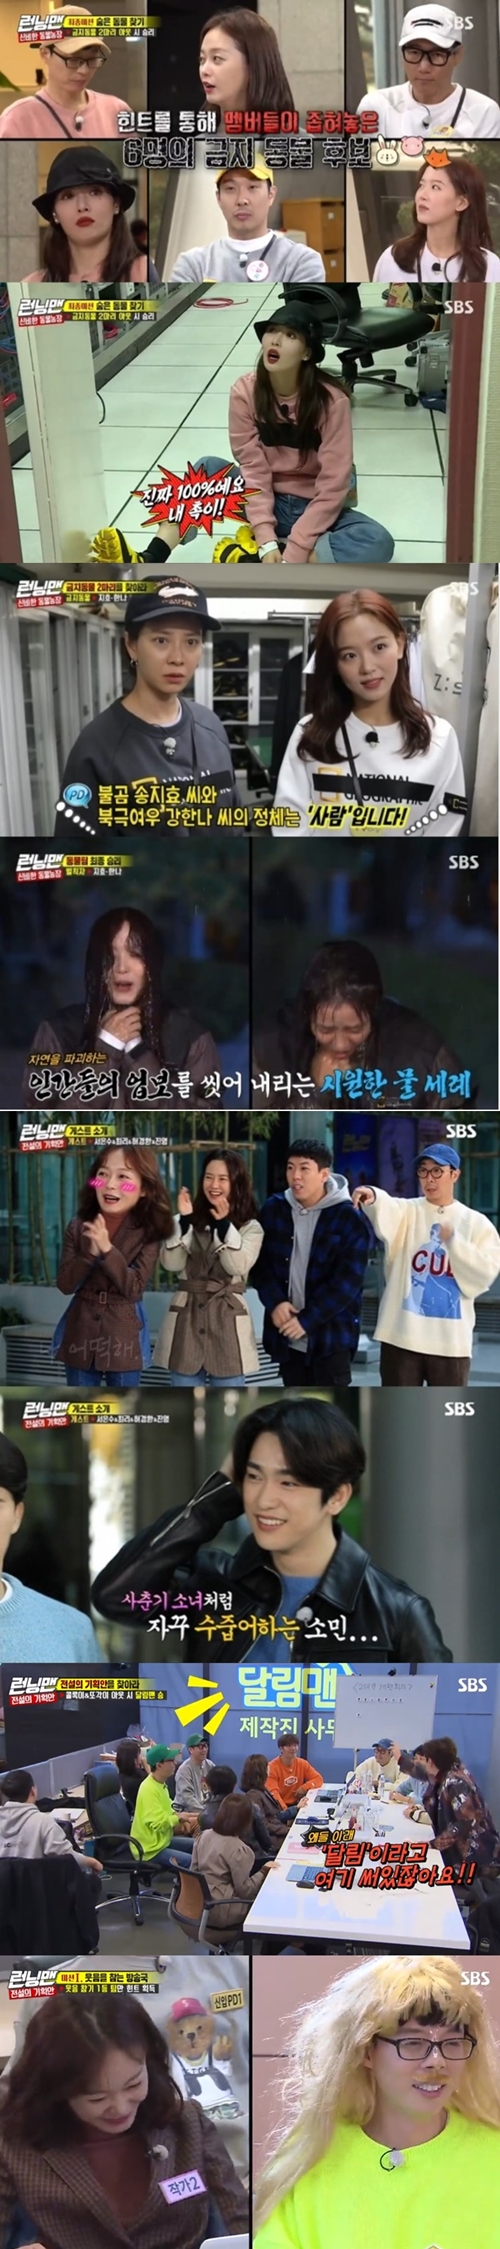 SBS Running Man is jumping to 10% of Per minute top TV viewer ratings and TV viewer ratings are on the rise.According to Nielsen Korea, a TV viewer rating research institute, Running Man, which was broadcast on the 17th, showed an increase in TV viewer ratings for the sixth consecutive week with an average TV viewer ratings of 5.4% and 2.3%.The 2049 target TV viewer ratings, which are important indicators of major advertising officials, rose by 4.8% (based on the second part of the Seoul metropolitan areas TV viewer ratings), not only to overtake the Masked Wang and the Donkey Ears, but also 1% more than last week.Per minute The best TV viewer ratings shot a whopping 10 percent.The broadcast was decorated with the final race of Mysterious Animal Farm and began to search for banned animals.If you find a forbidden animal and in-N-Out Burger, the general animal wins, but the forbidden animal was able to use the closed area.When an In-N-Out Burgered animal is created by a prohibited animal, a closed area is created and all hints in the closed area disappear, and even if the animal is inside it, the In-N-Out Burger is made.Yoo Jae-Suks performance shone in the face of everyone questioning each other.Yoo Jae-Suk found out that the forbidden animals were people, and he noticed that Kang Han-Na and Song Ji-hyo were sisters and bears who became foxes respectively.In the meantime, Kang Han-Na and Song Ji-hyo respectively targeted Hyun-ah and Everglow Shihyeon in-N-Out Burger and Yoo Jae-Suk.Yoo Jae-Suk informed members of the identity of the banned animals in an urgent situation and eventually the banned animals Kang Han-Na and Song Ji-hyo were in-N-Out Burger and received the final penalty.On the other hand, on the same day, the Legendary Plan Race, which was guested by God Seven Jinyoung, actor Seo Eun-soo, Choi Ri and comedian Hur Kyung-hwan, was also released.Jeon So-min welcomed Jinyoung by revealing his excitement, but he gave a big smile with unexpected sweat.Since then, members have been divided into PD, writers, and new PD teams of the Ralim Man program and have begun to search for Kolok Lee and the other, which is reported as a ghost story of the broadcaster.The first mission was to find a laugh. You have to put up with laughter under any circumstances, and if you laugh, you have to carry out a dressing penalty.With a fierce smile, The Man from Nowhere appeared in front of the members.Everyone was nervous about the powerful laugh alarm and this scene took the best one minute with 10% of Per minute top TV viewer ratings.Next weeks broadcast will be released with the identity of Kolocki and the other.